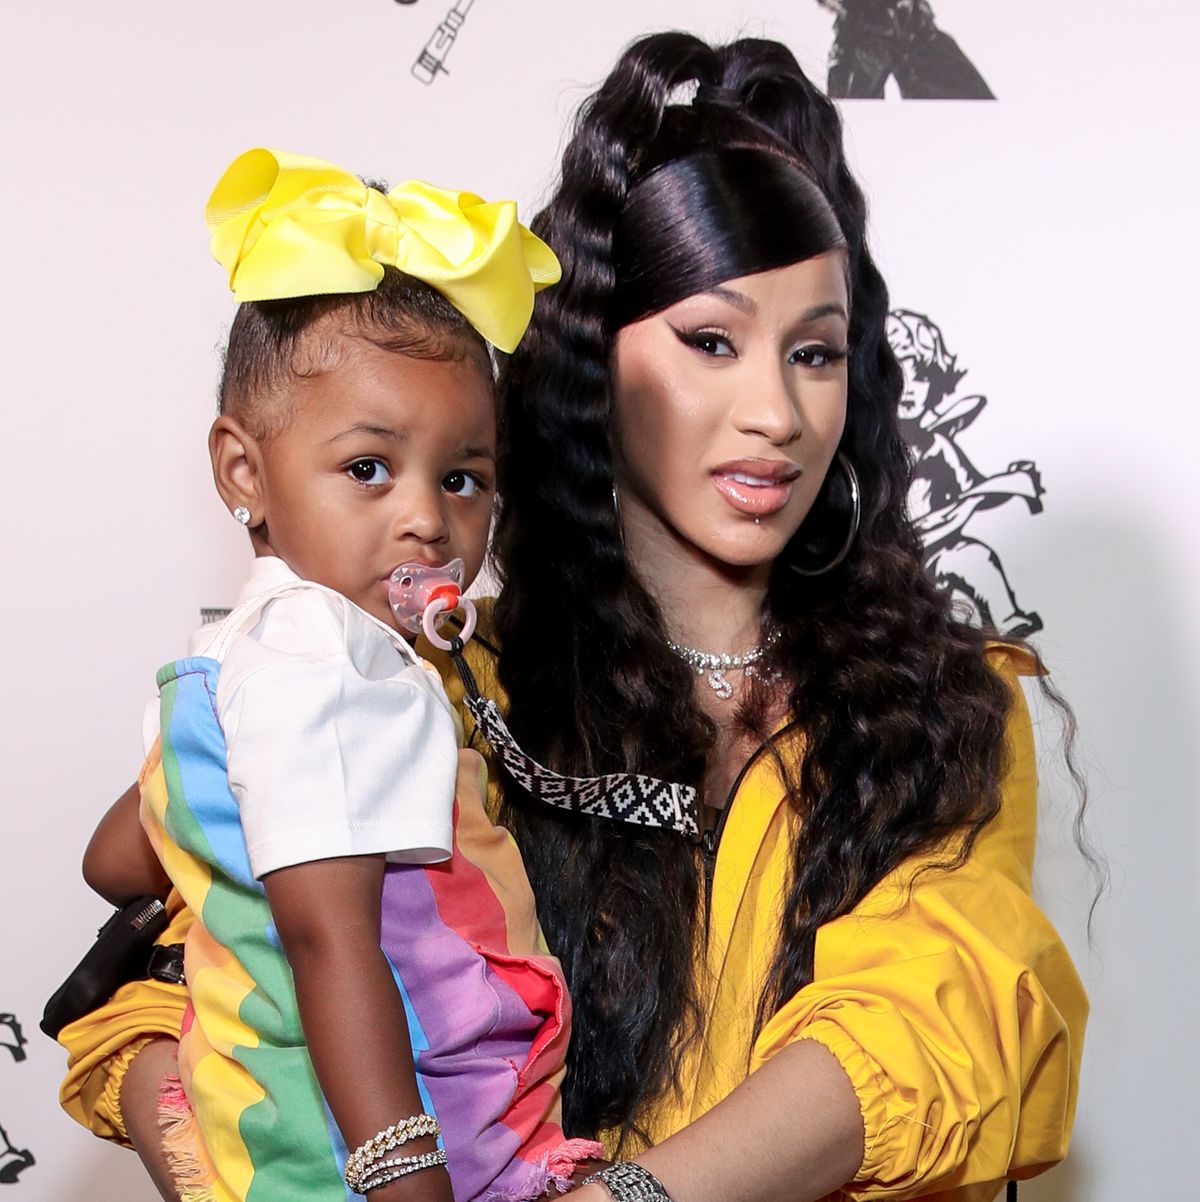 Cardi B Shares Maternity Portraits of Daughter Kulture and Offset